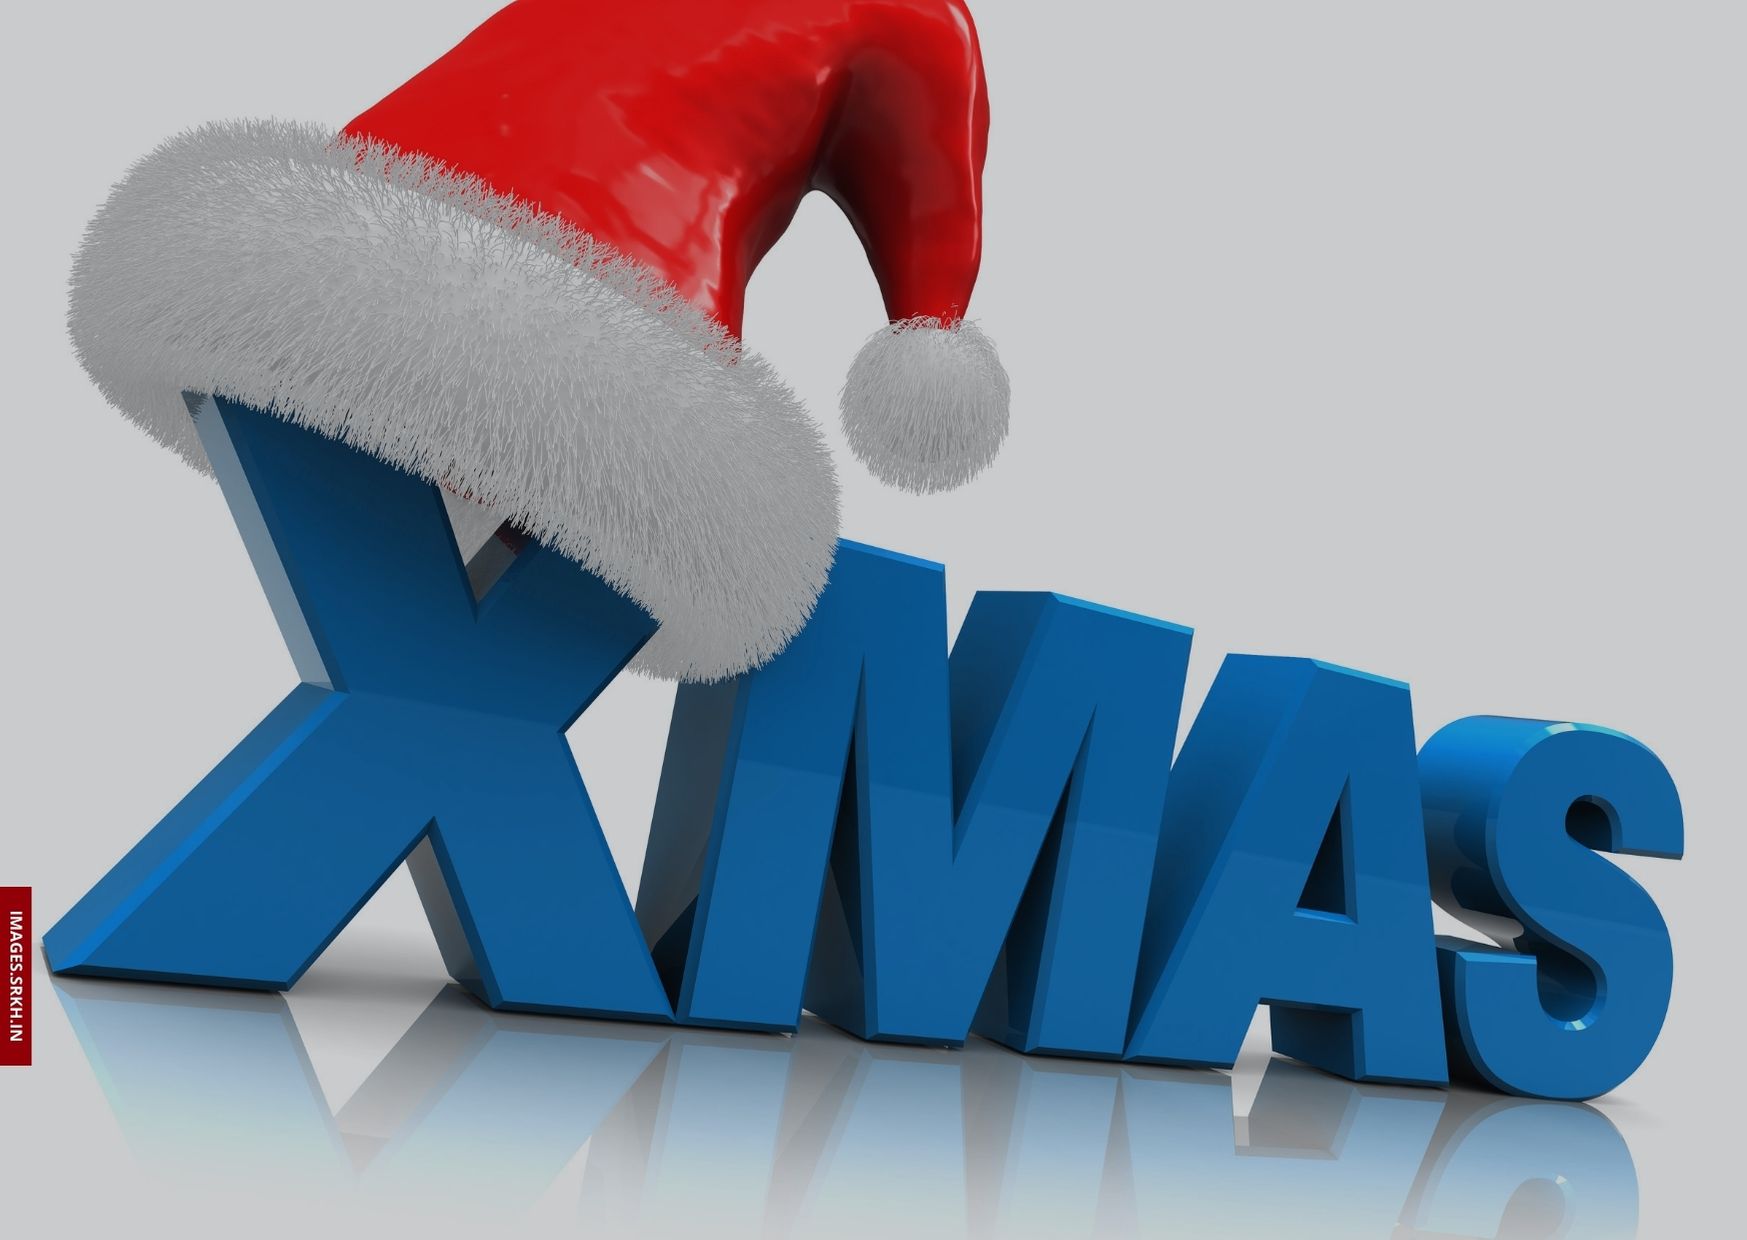 Xmas Images Download